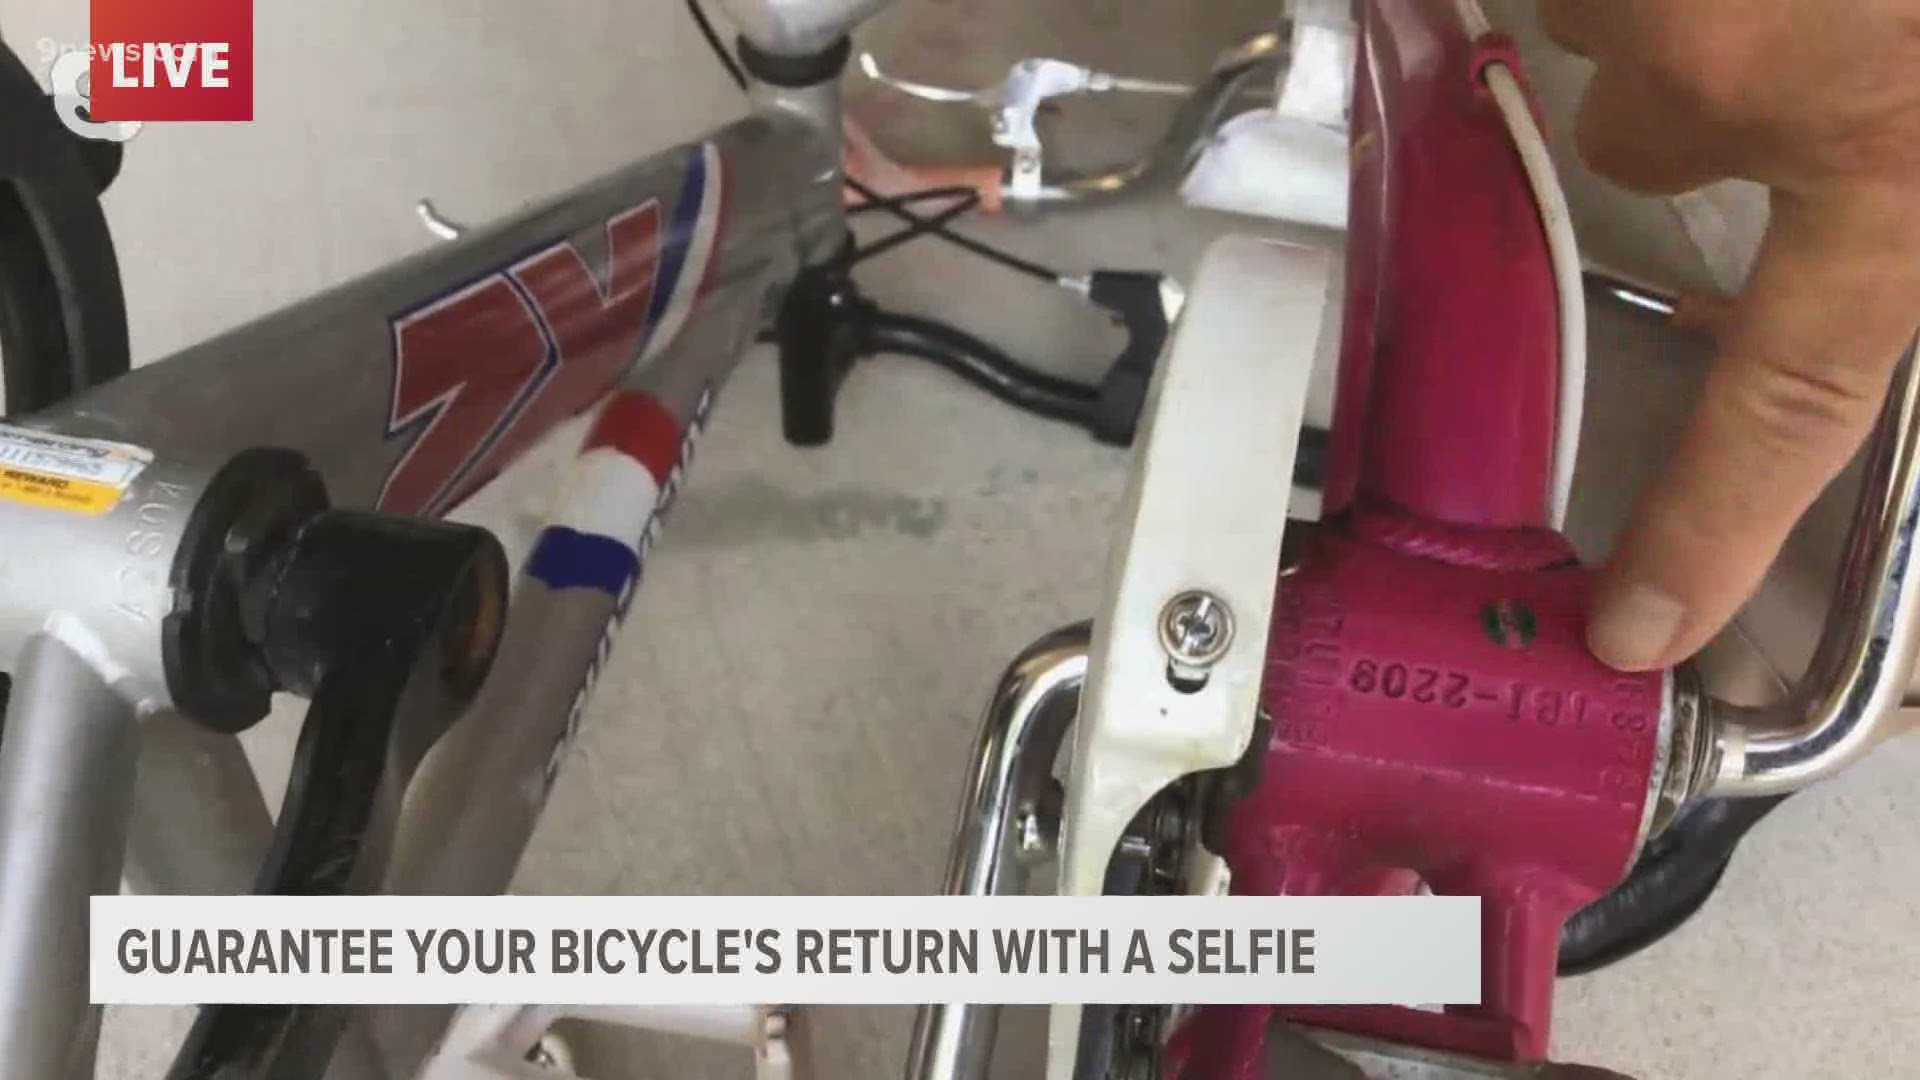 The "Flip, Snap, Selfie" method encourages people to take a picture of their bike's serial number to help police get stolen bikes back to their owners.